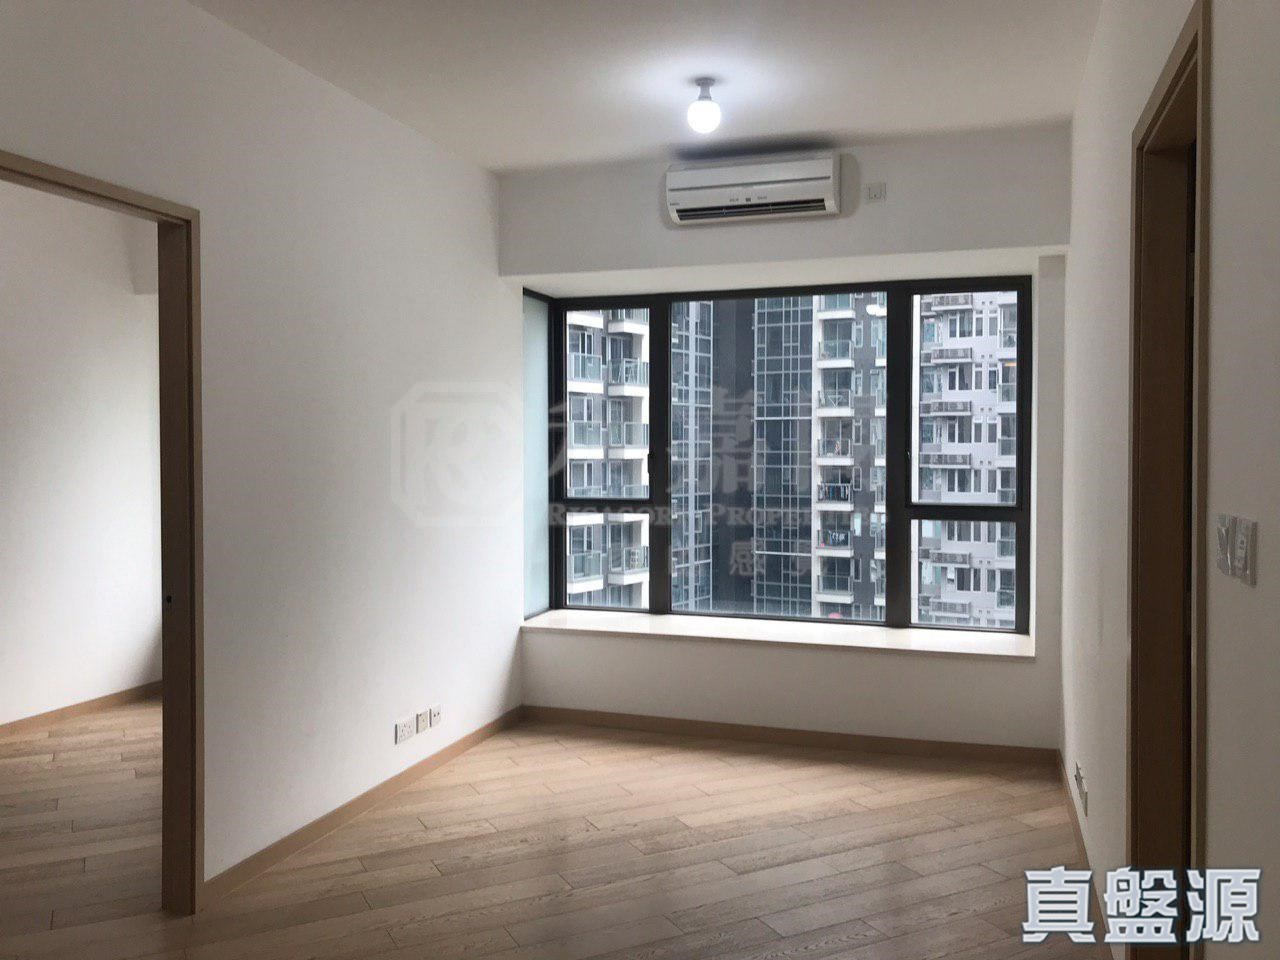 [RC GINNY] MIDDLE FLOOR 1 BR IN THE VISIONARY